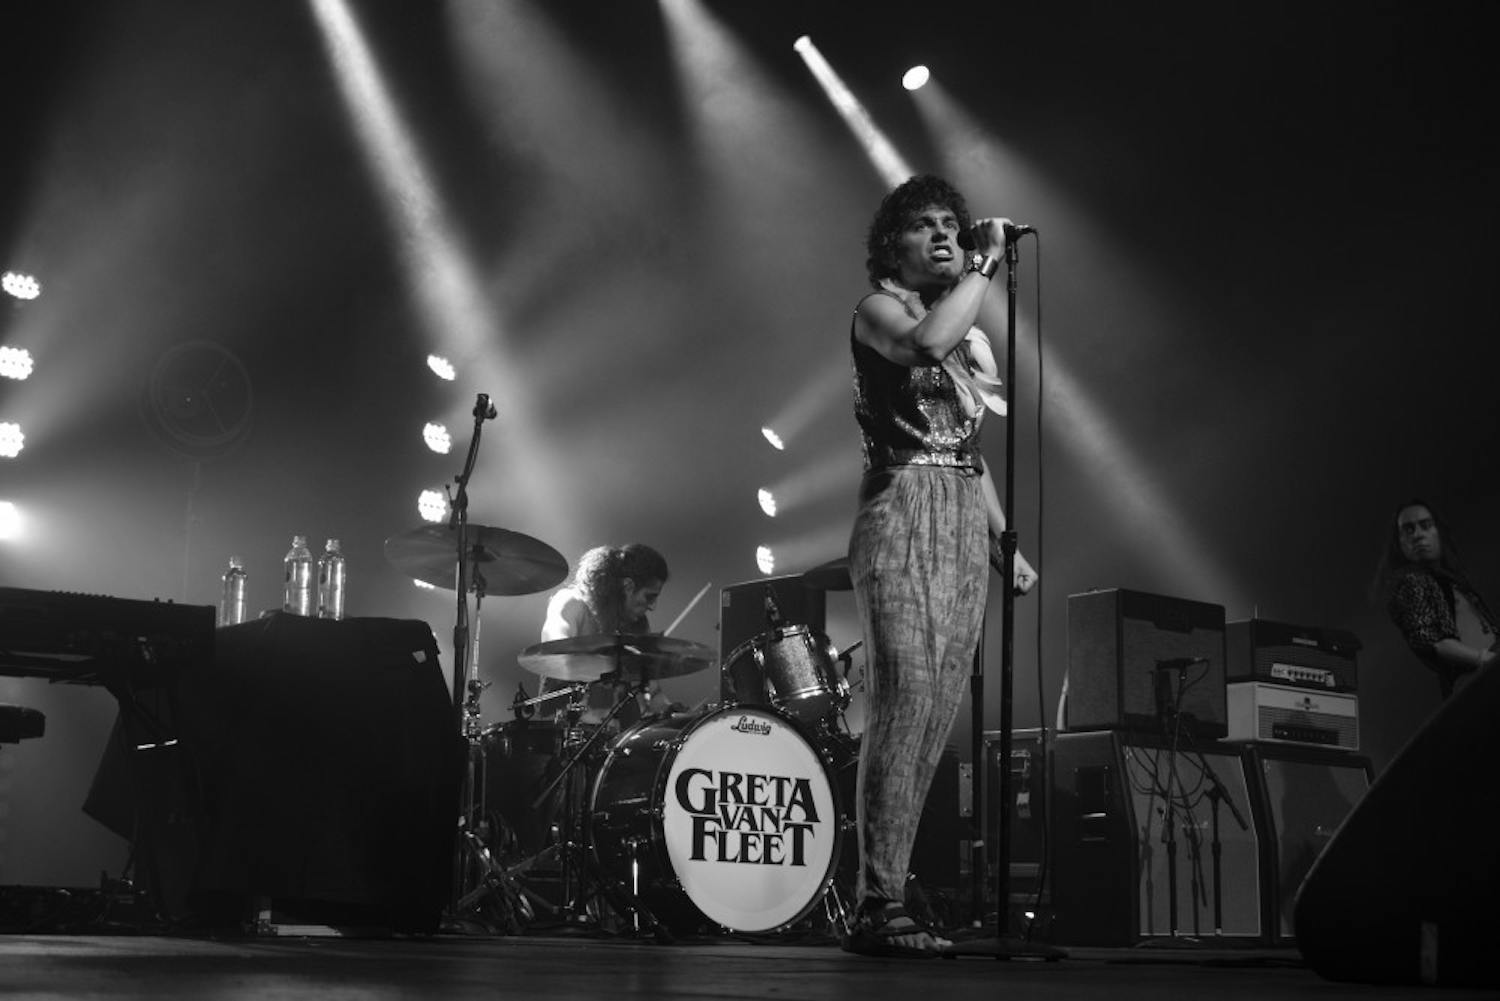 Greta Van Fleet performed at the Sylvee earlier this month. The band will be returning to Madison on June 4, 2019 at the Breese Stevens Field.